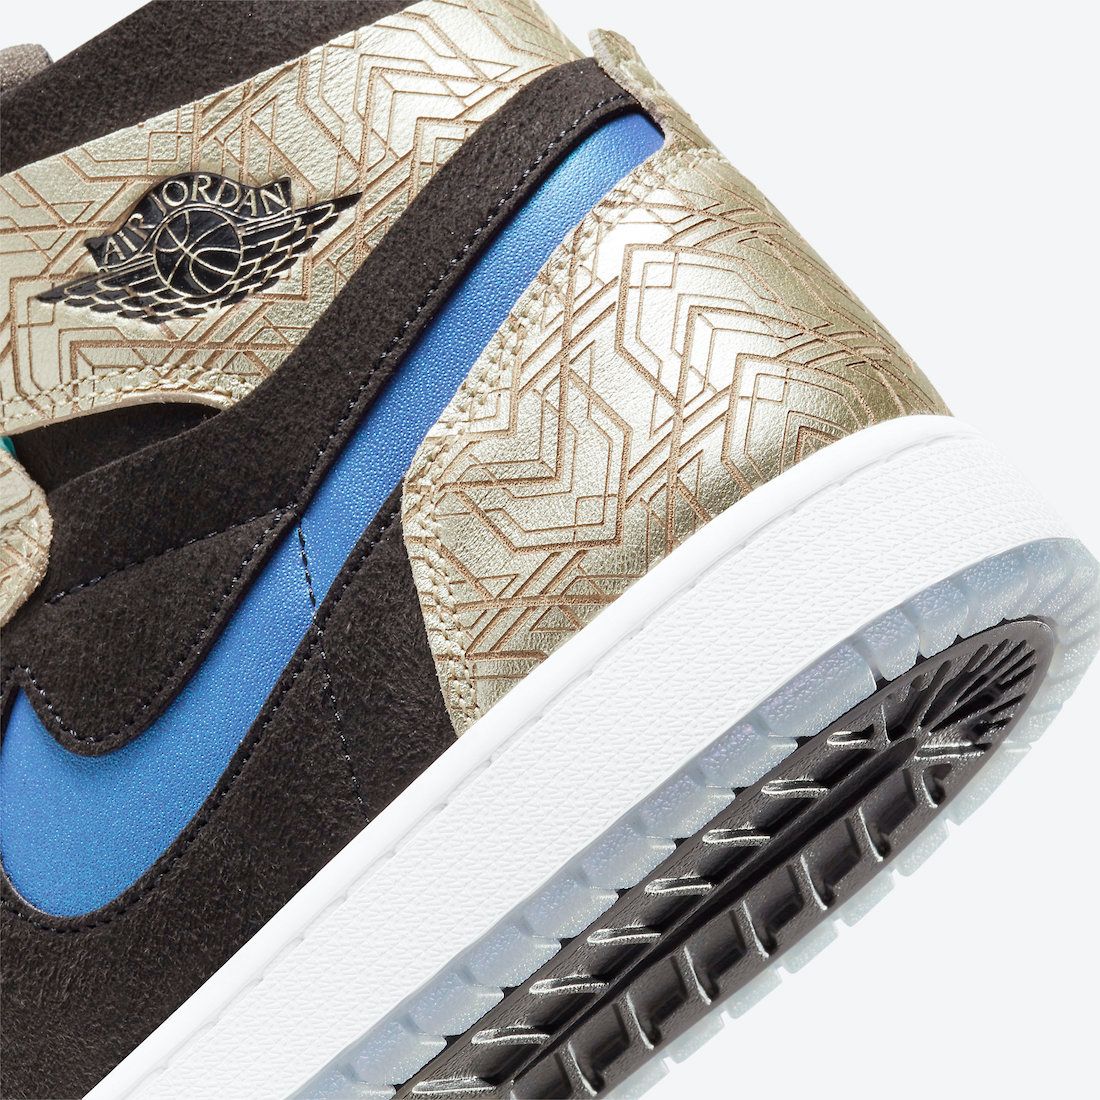 The Air 1 Zoom CMFT 'Gold Laser' Makes a Statement -